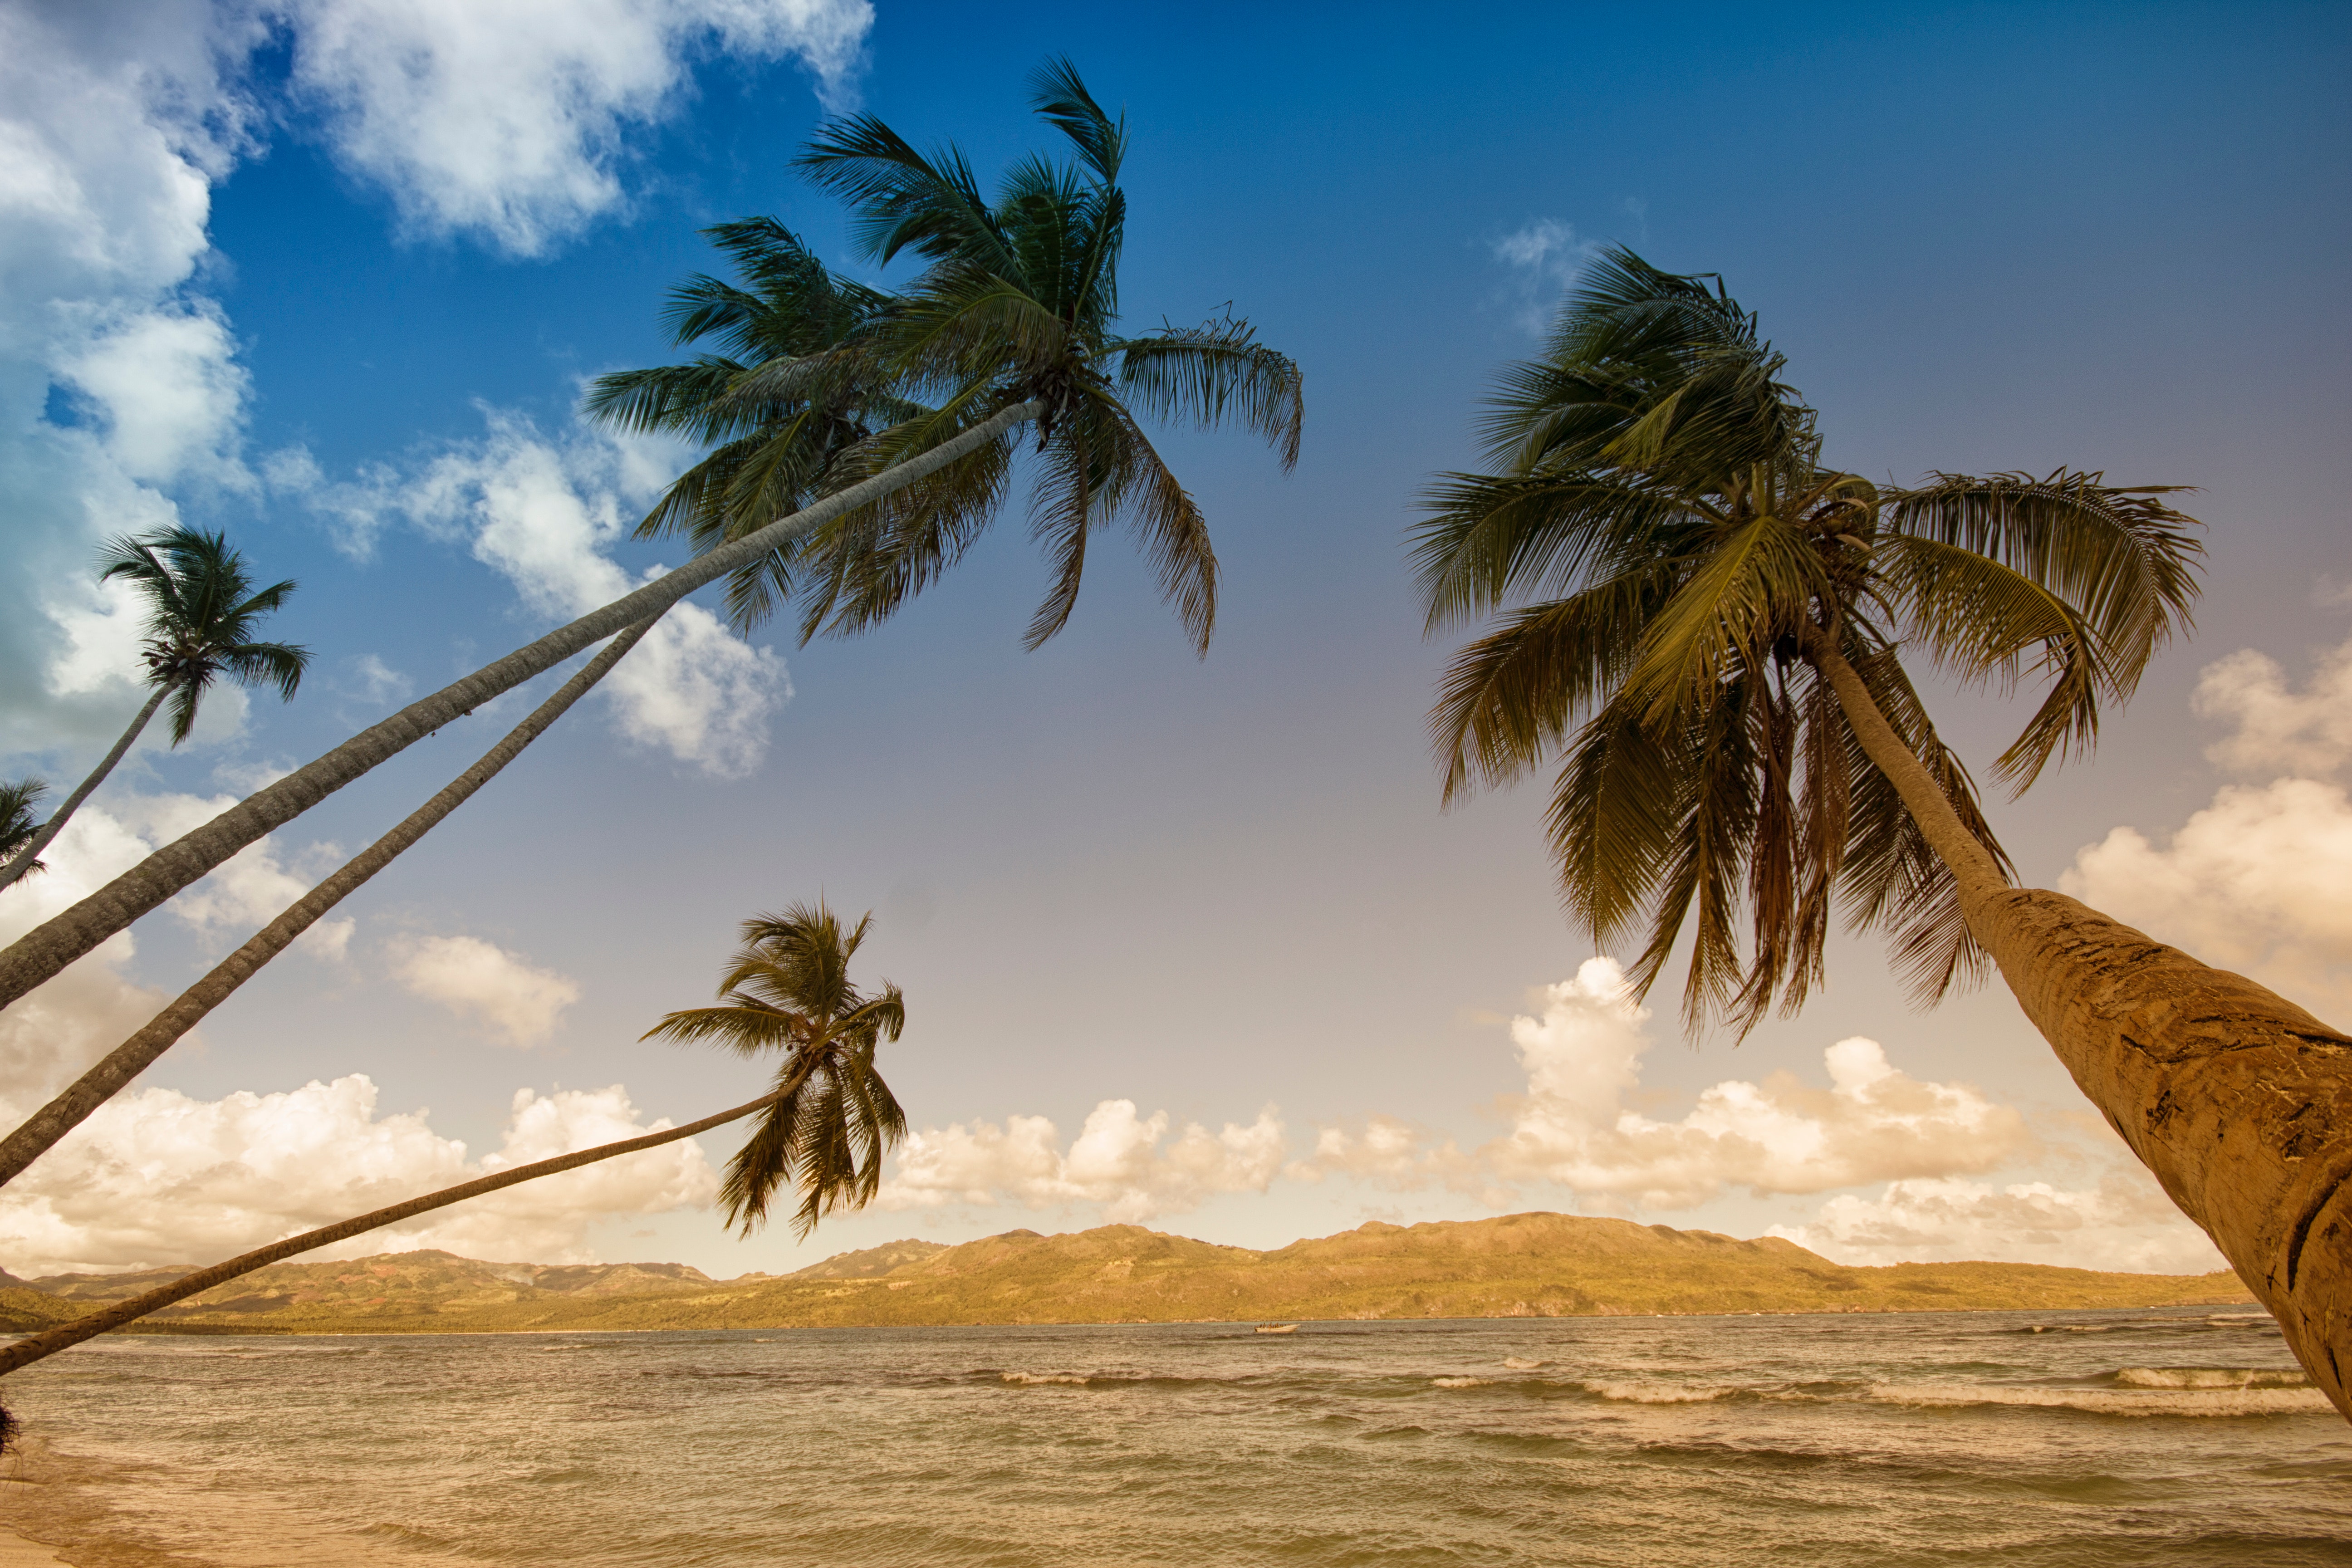 Coconut trees in sea shore during daytime photo